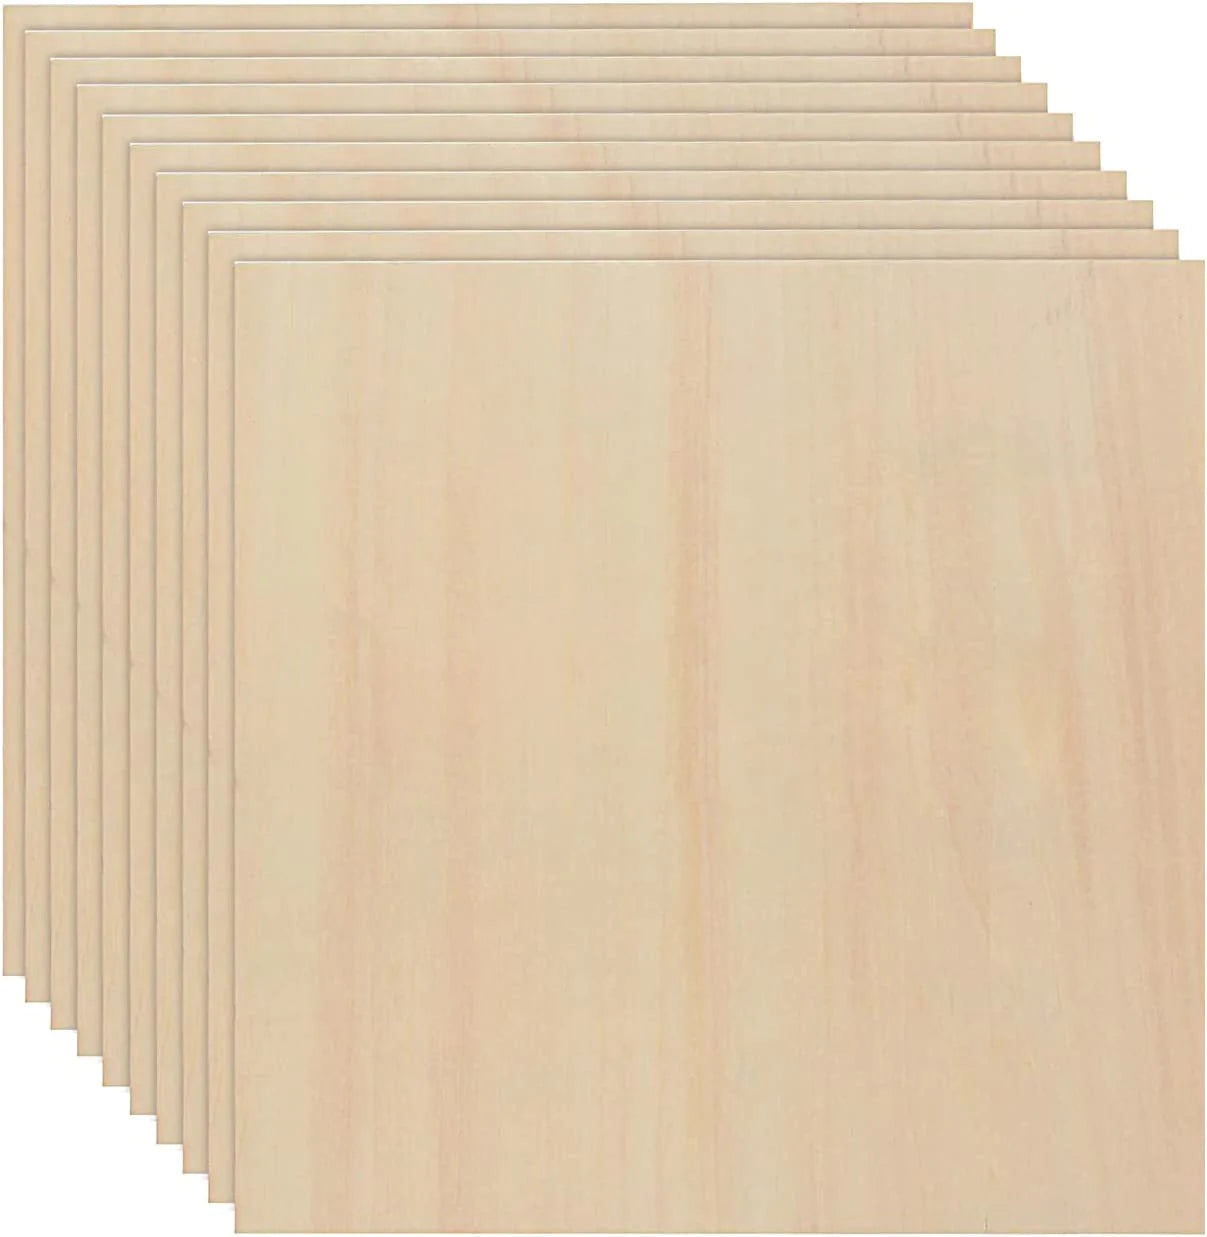 20 Pack Basswood Sheets, Thin Balsa Wood Sheets for Craft, Laser